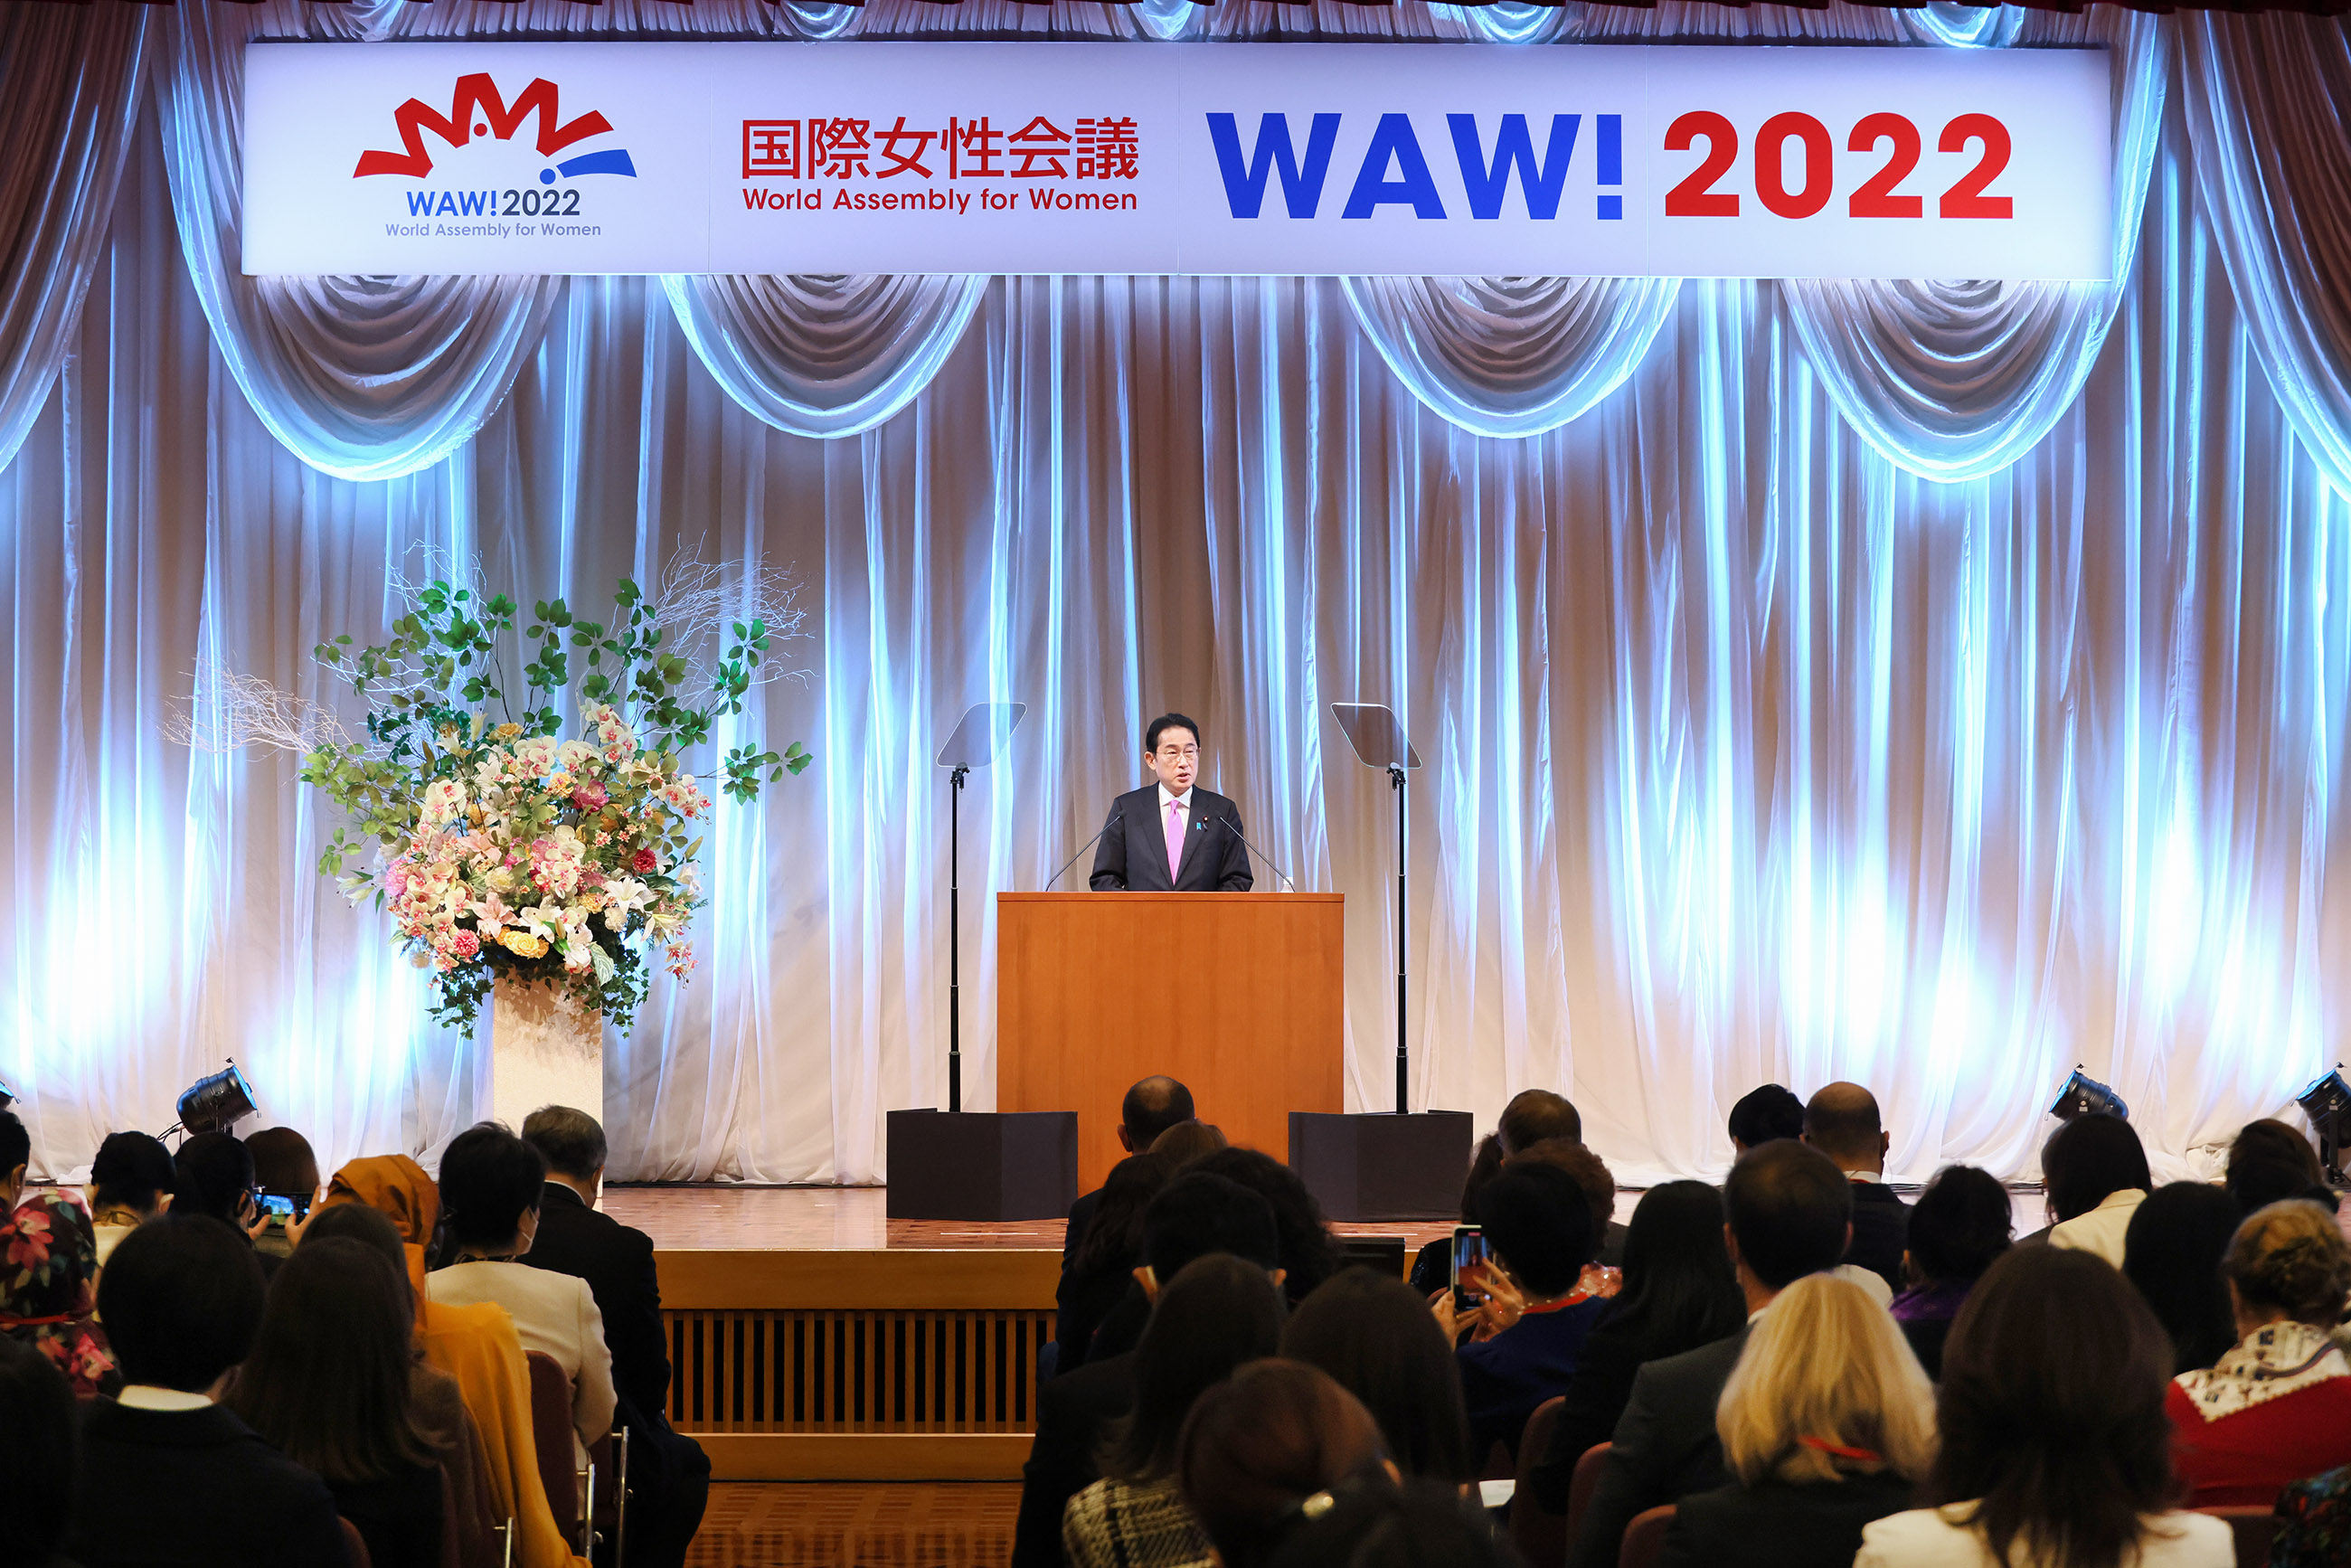 World Assembly for Women: WAW! 2022